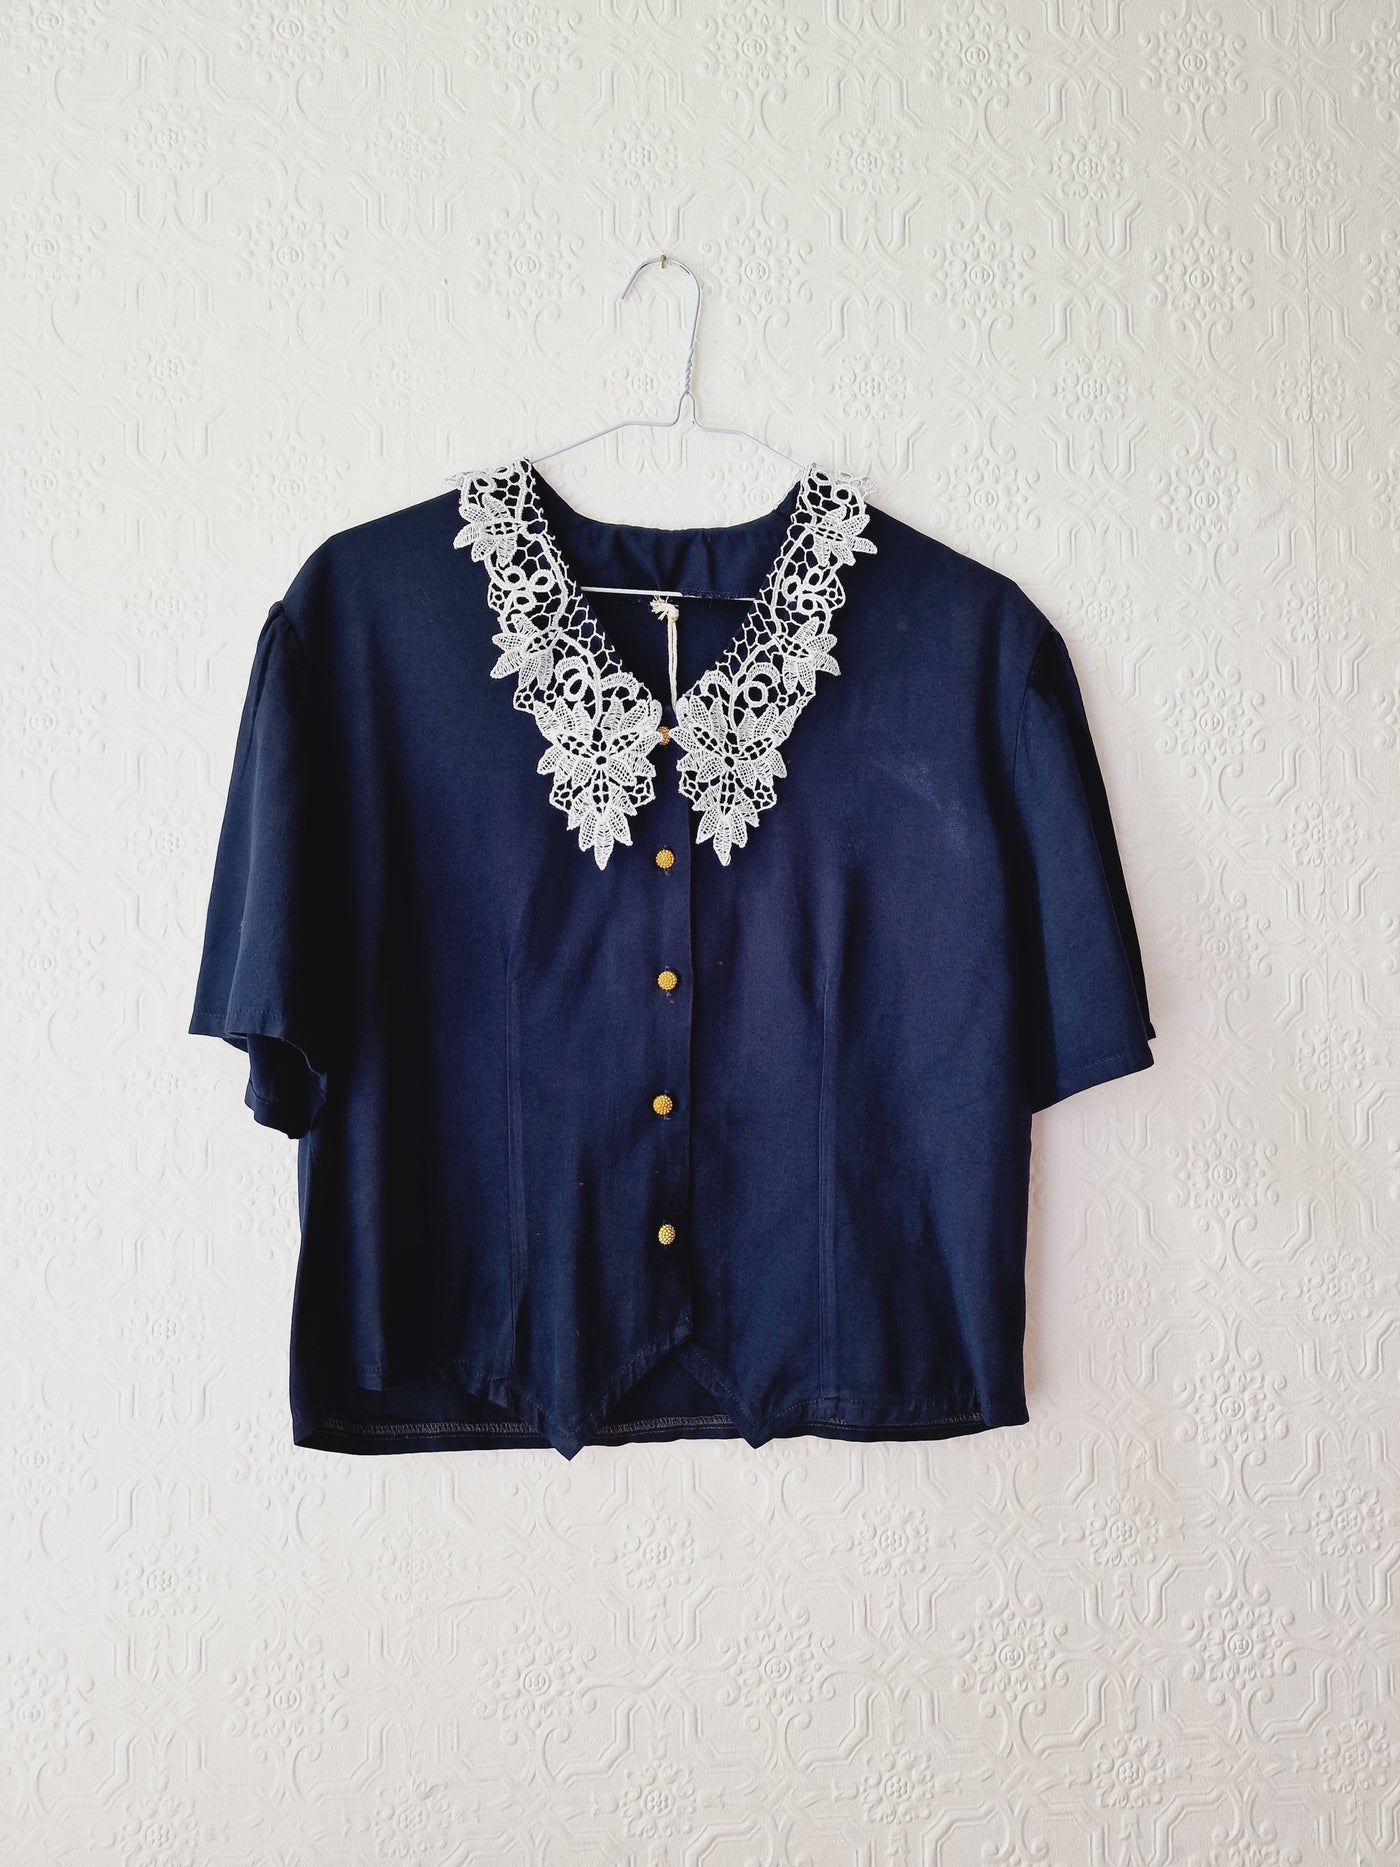 Vintage 80s Navy Blue Short Sleeve Blouse with Lace Collar - S/M